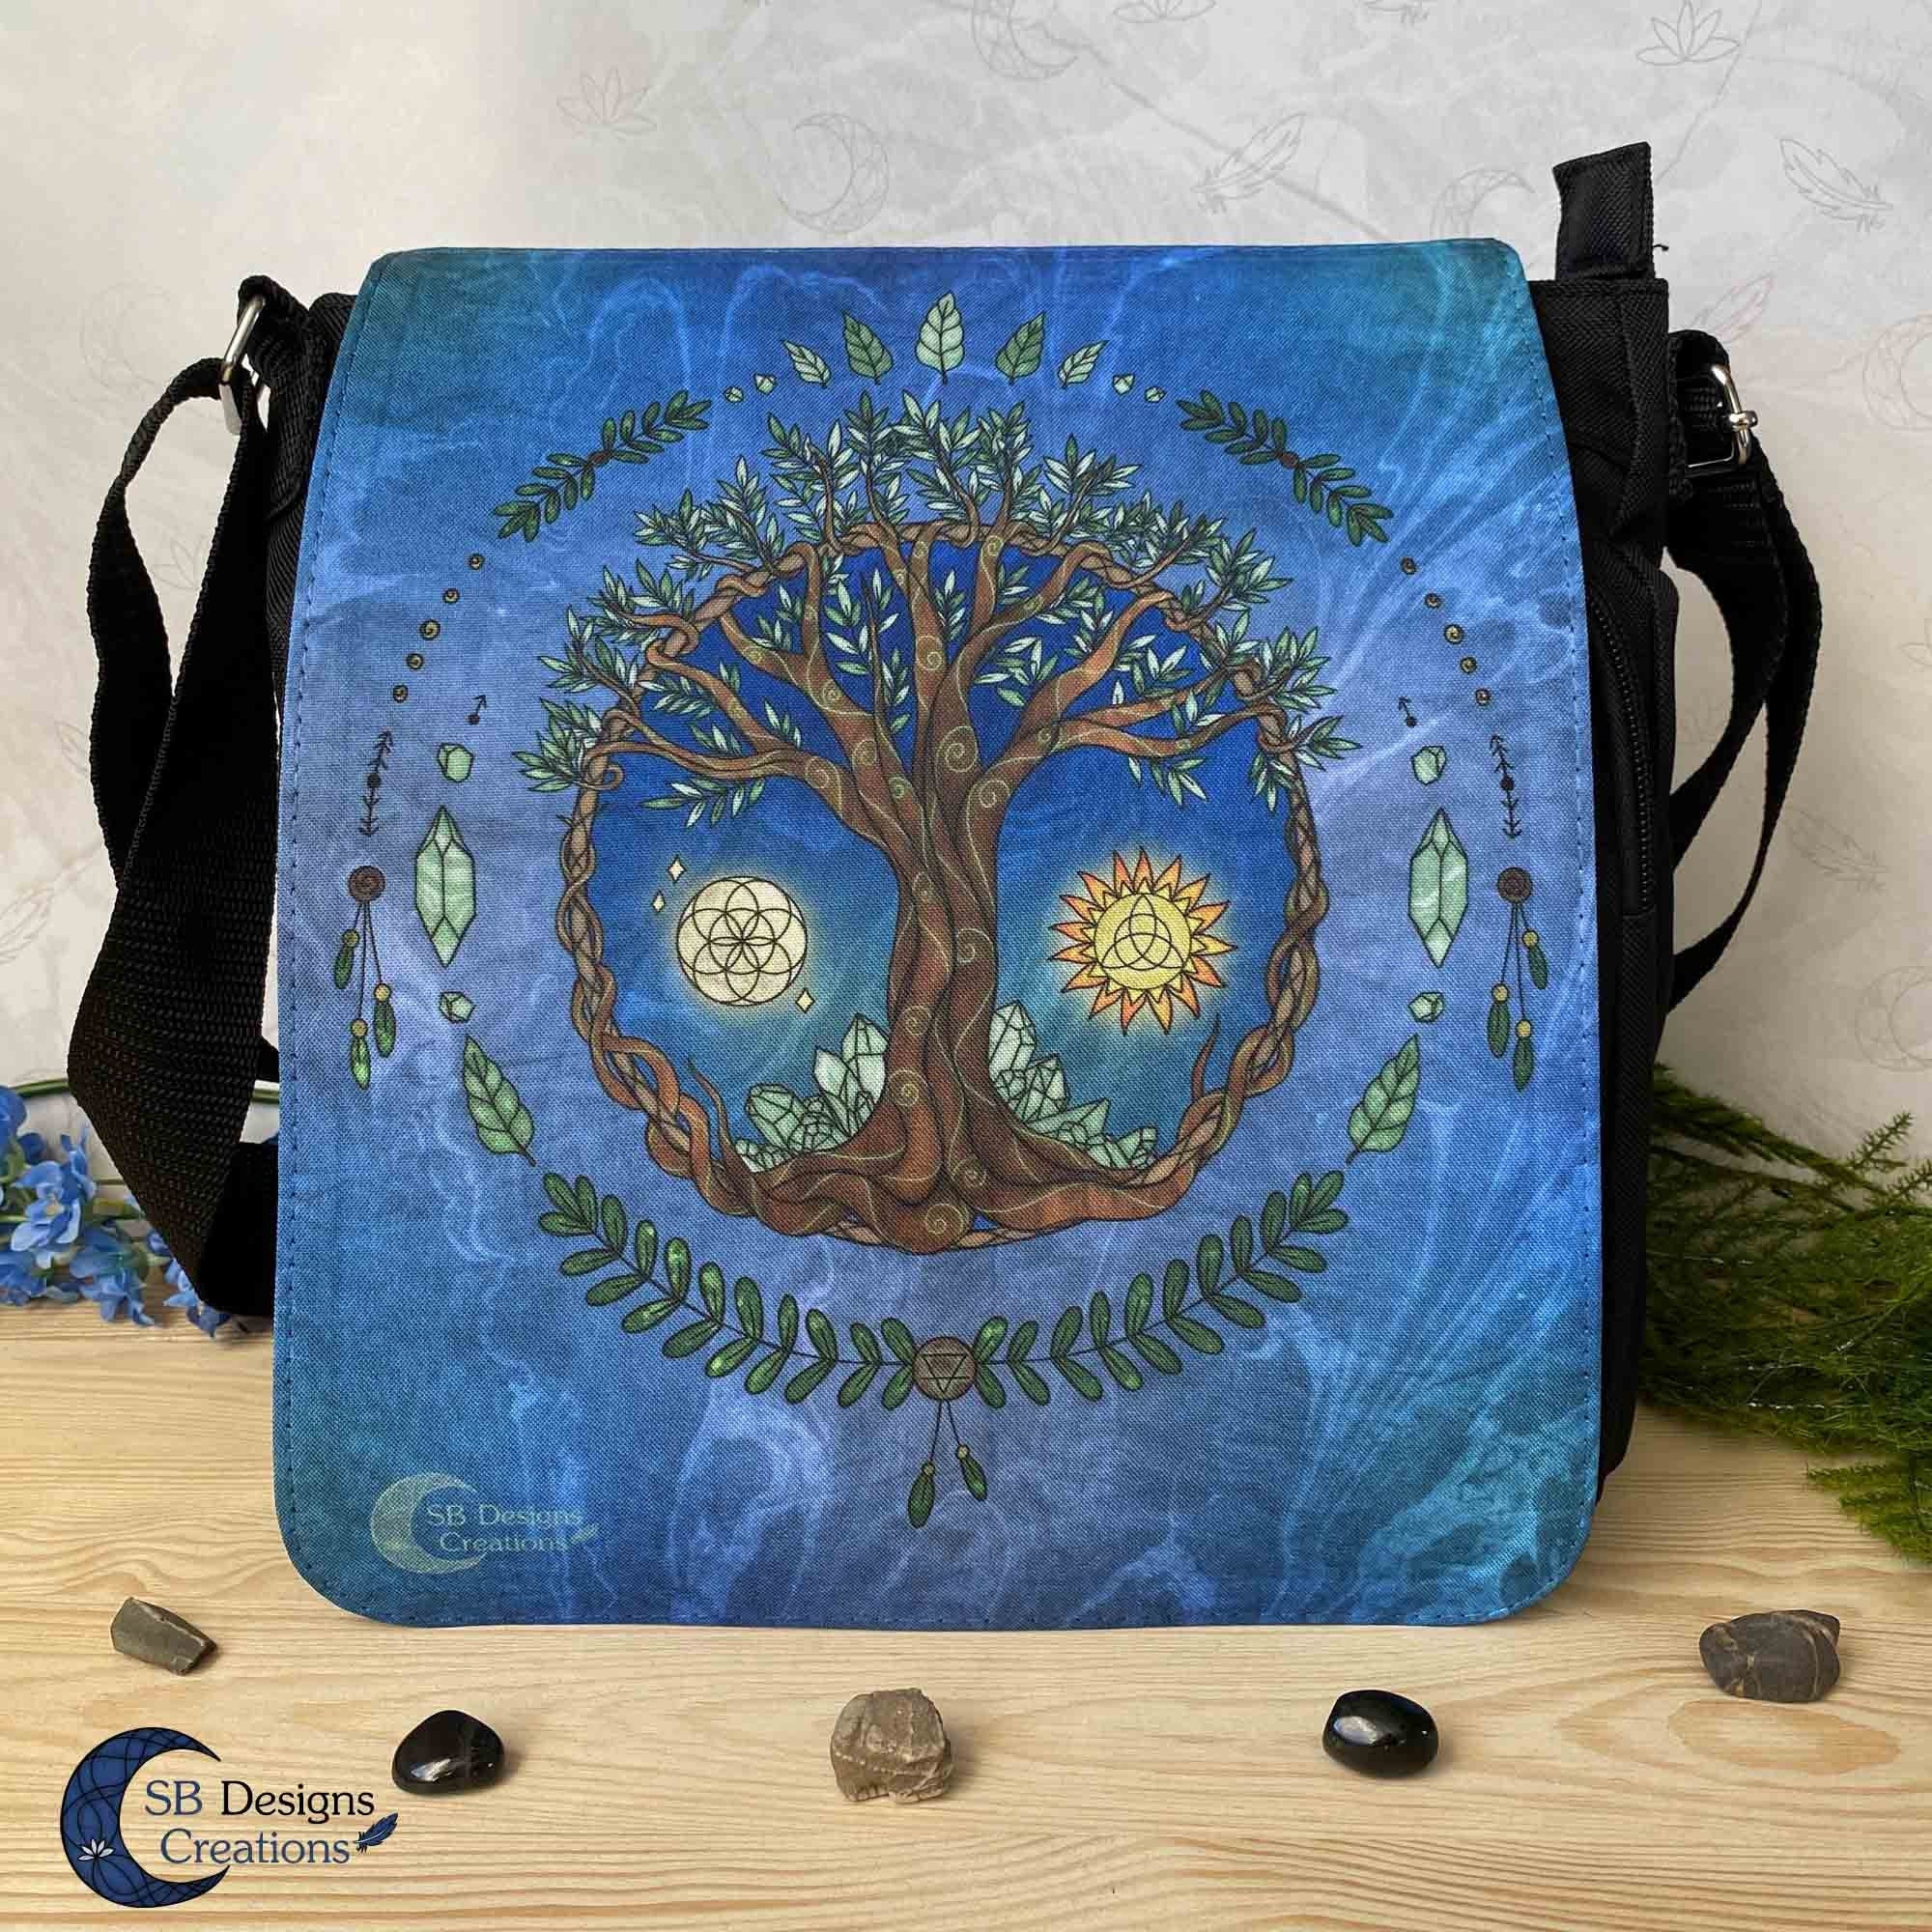 Tree of Life bag, Buy online from source